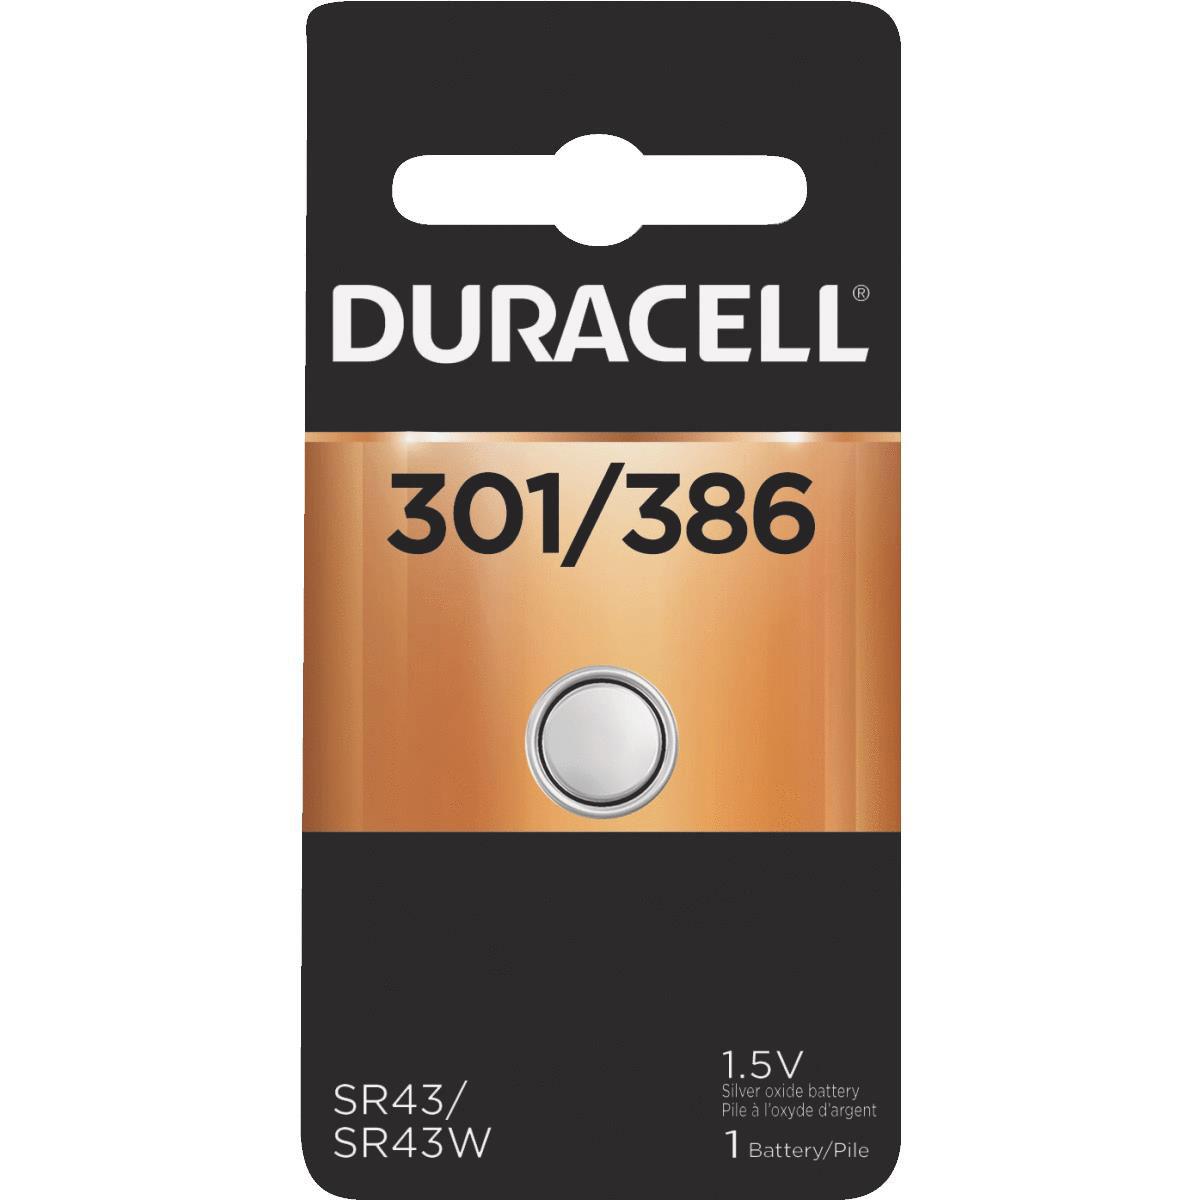 Image of Duracell D301/386 1.5V Silver Oxide Battery for Watch/Electronic